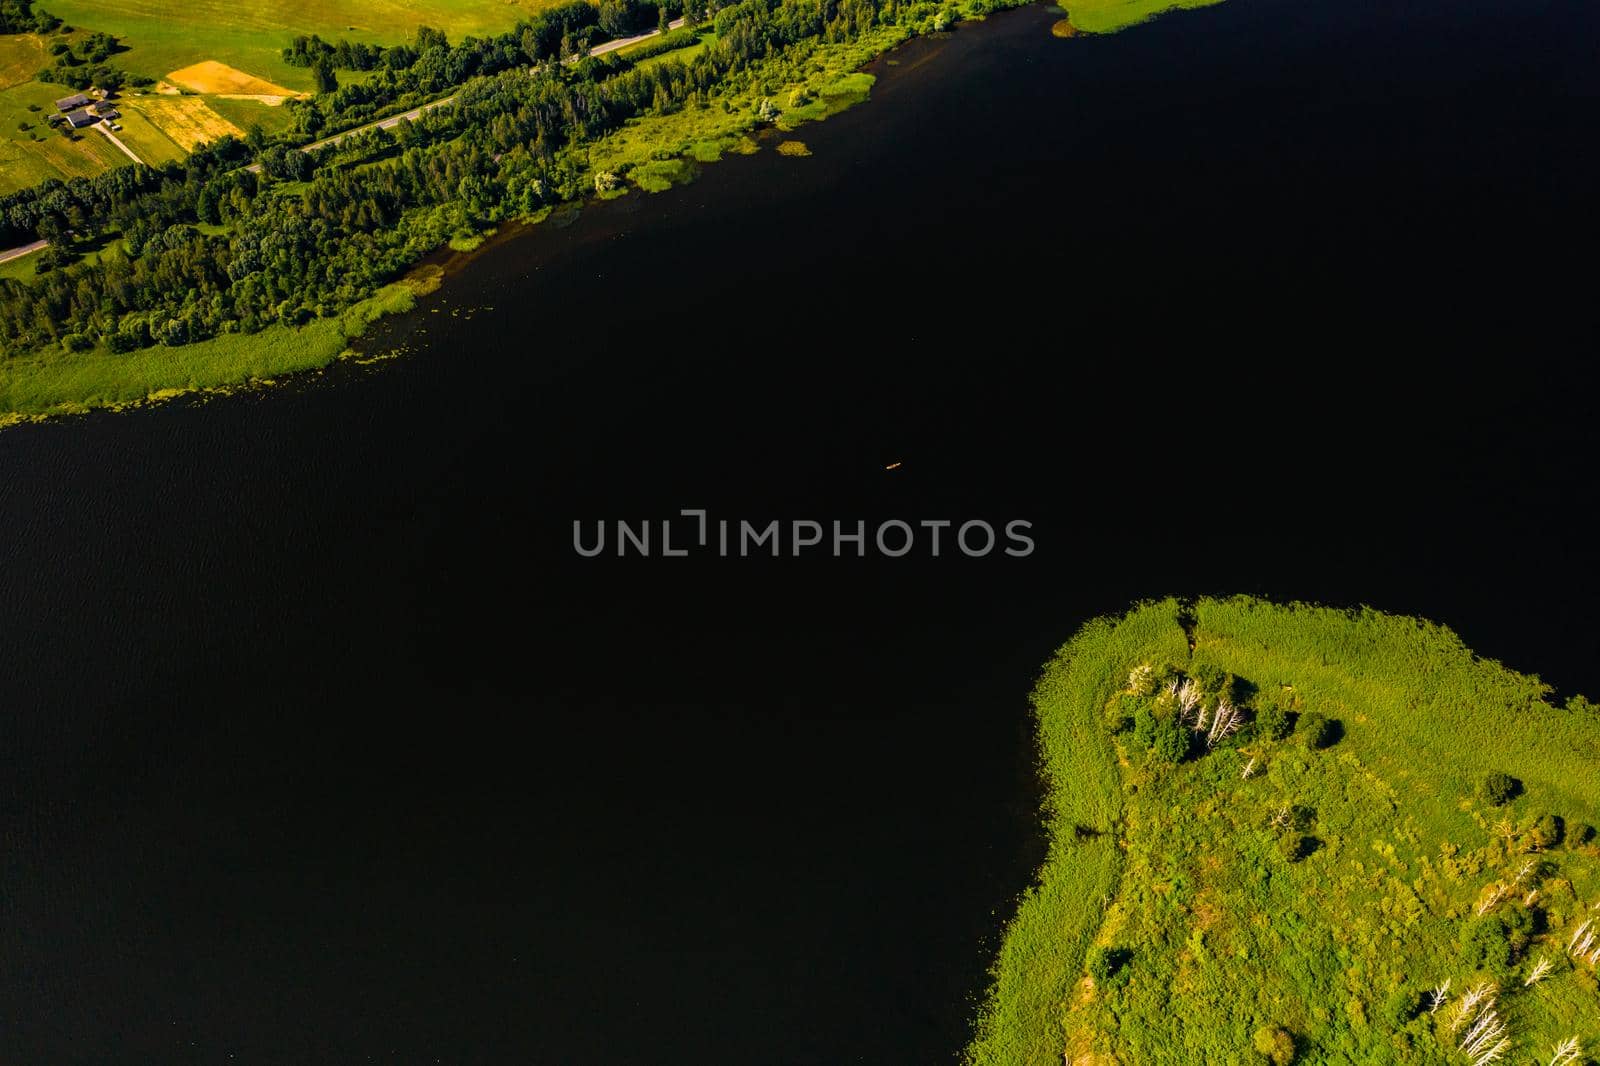 Top view of lake Drivyaty in the Braslav lakes National Park, the most beautiful lakes in Belarus.An island in the lake.Belarus. by Lobachad